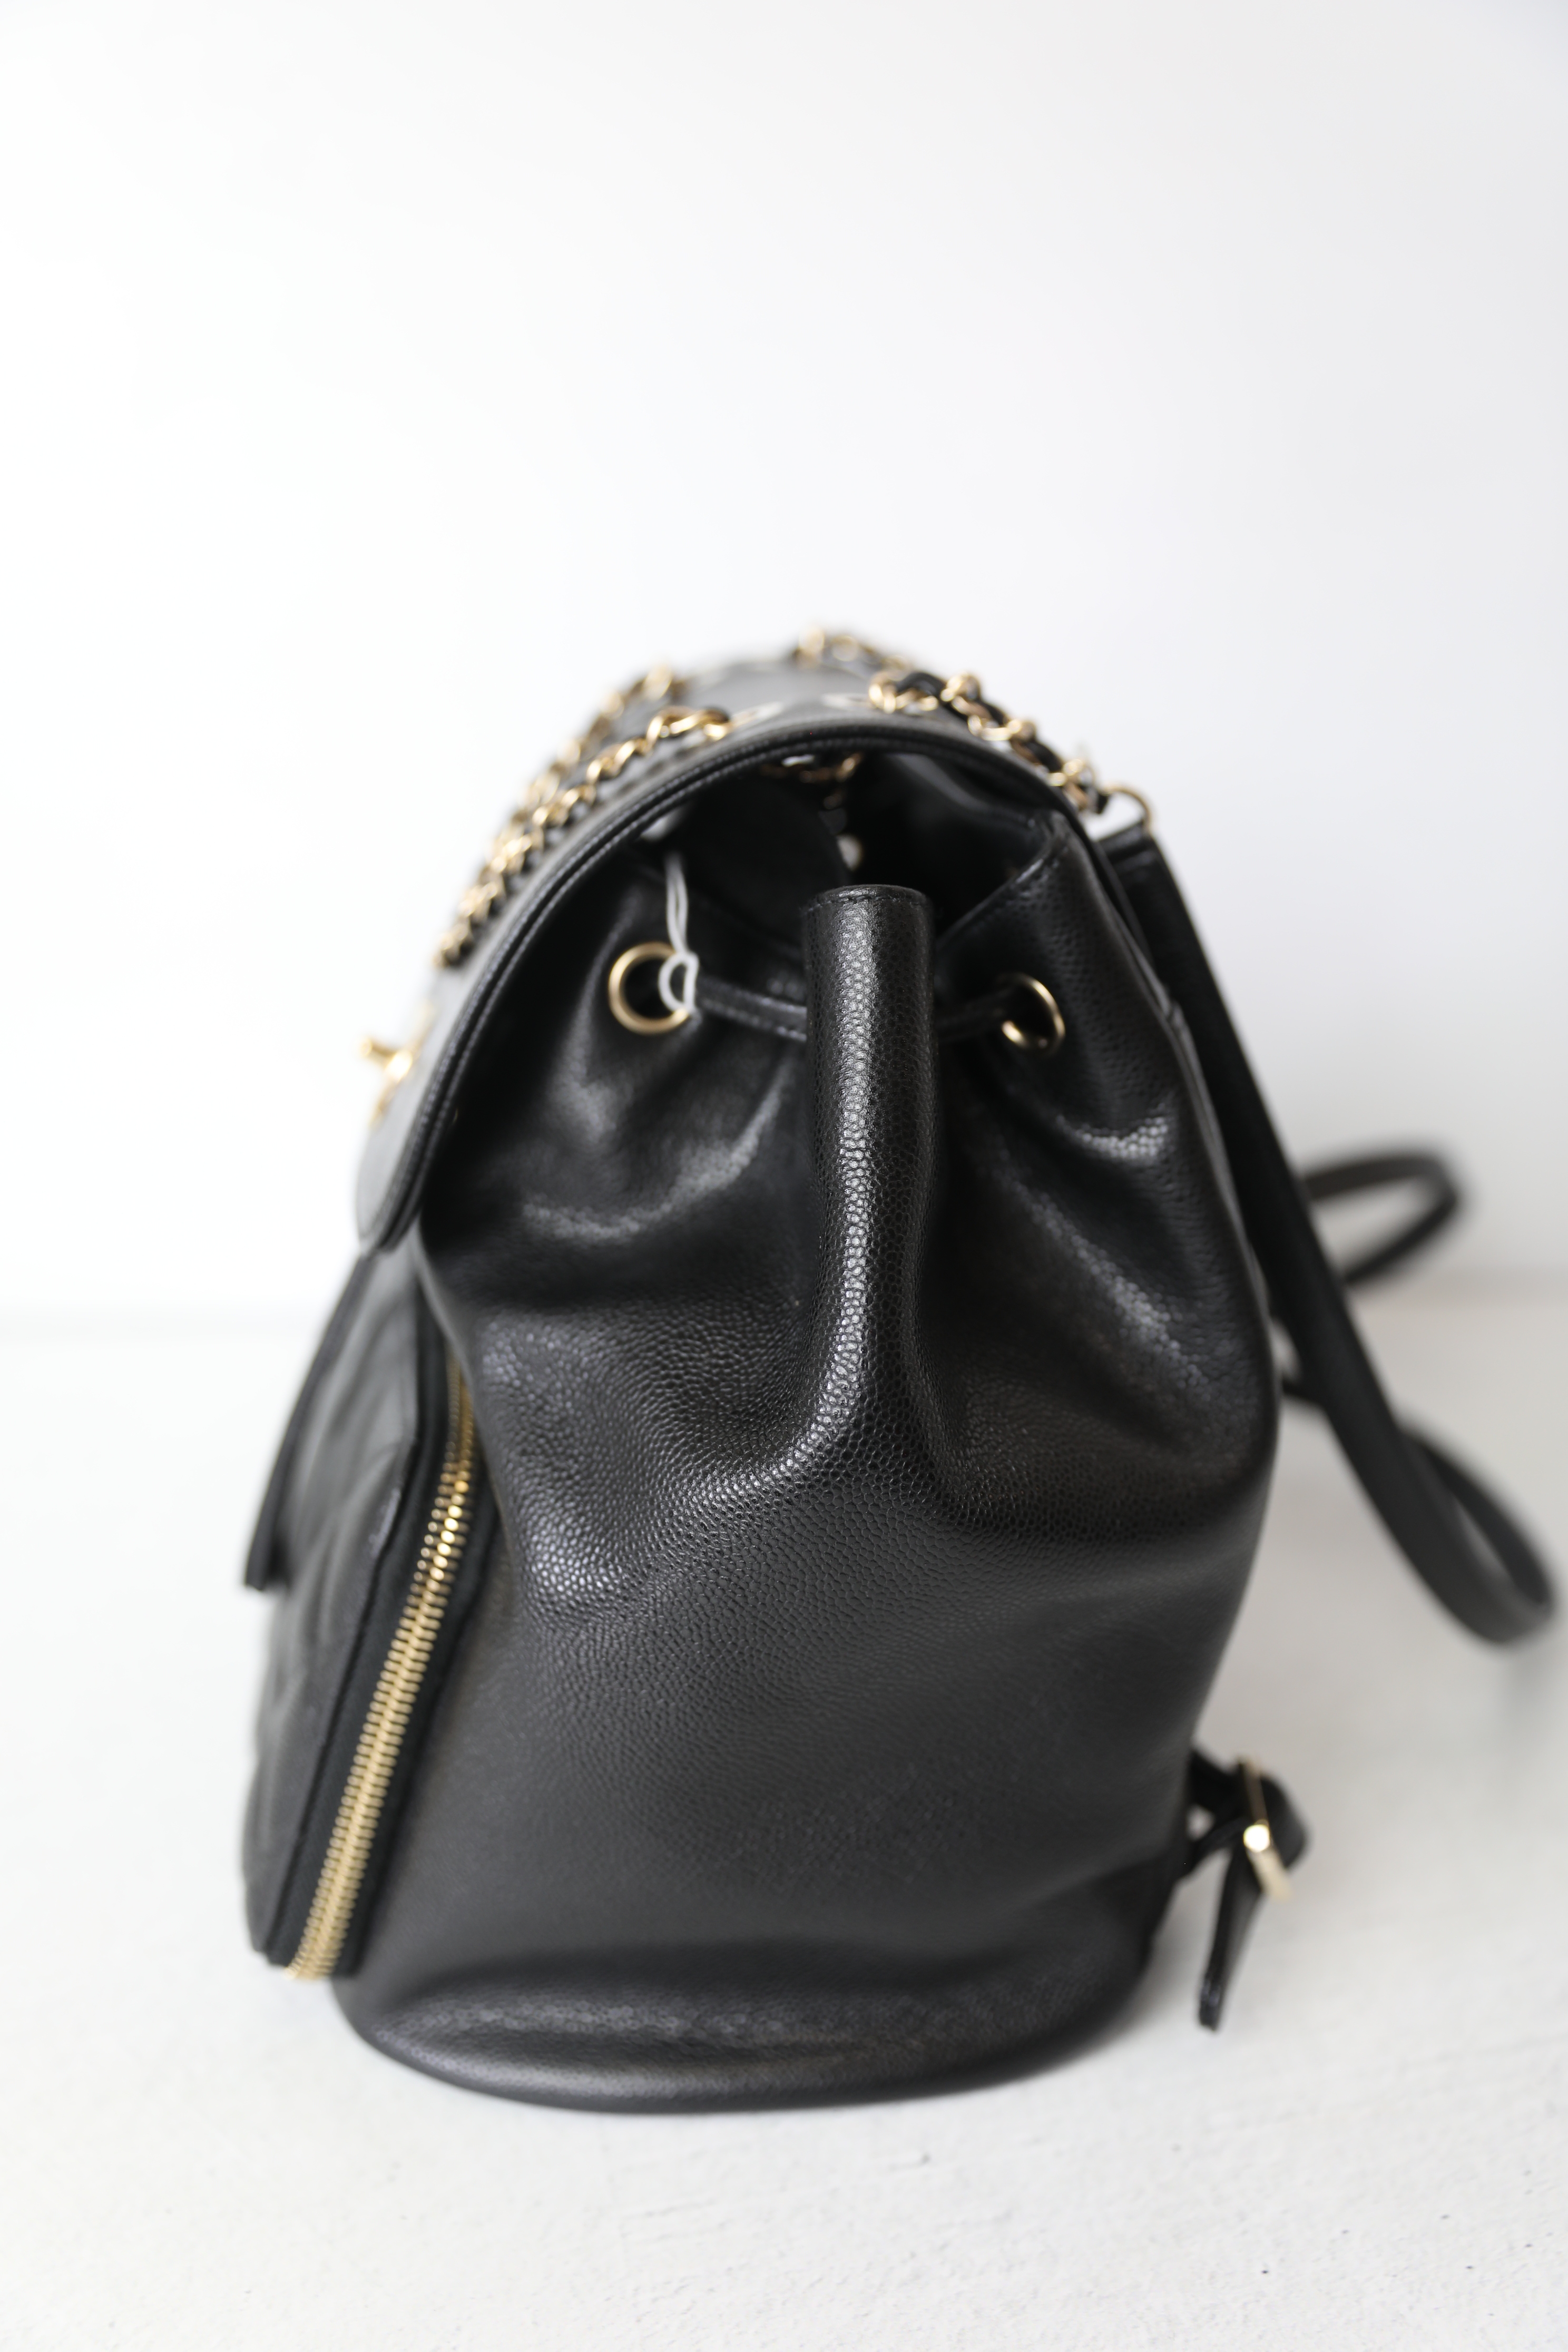 Chanel Medium Affinity Backpack, Black Caviar with Gold Hardware